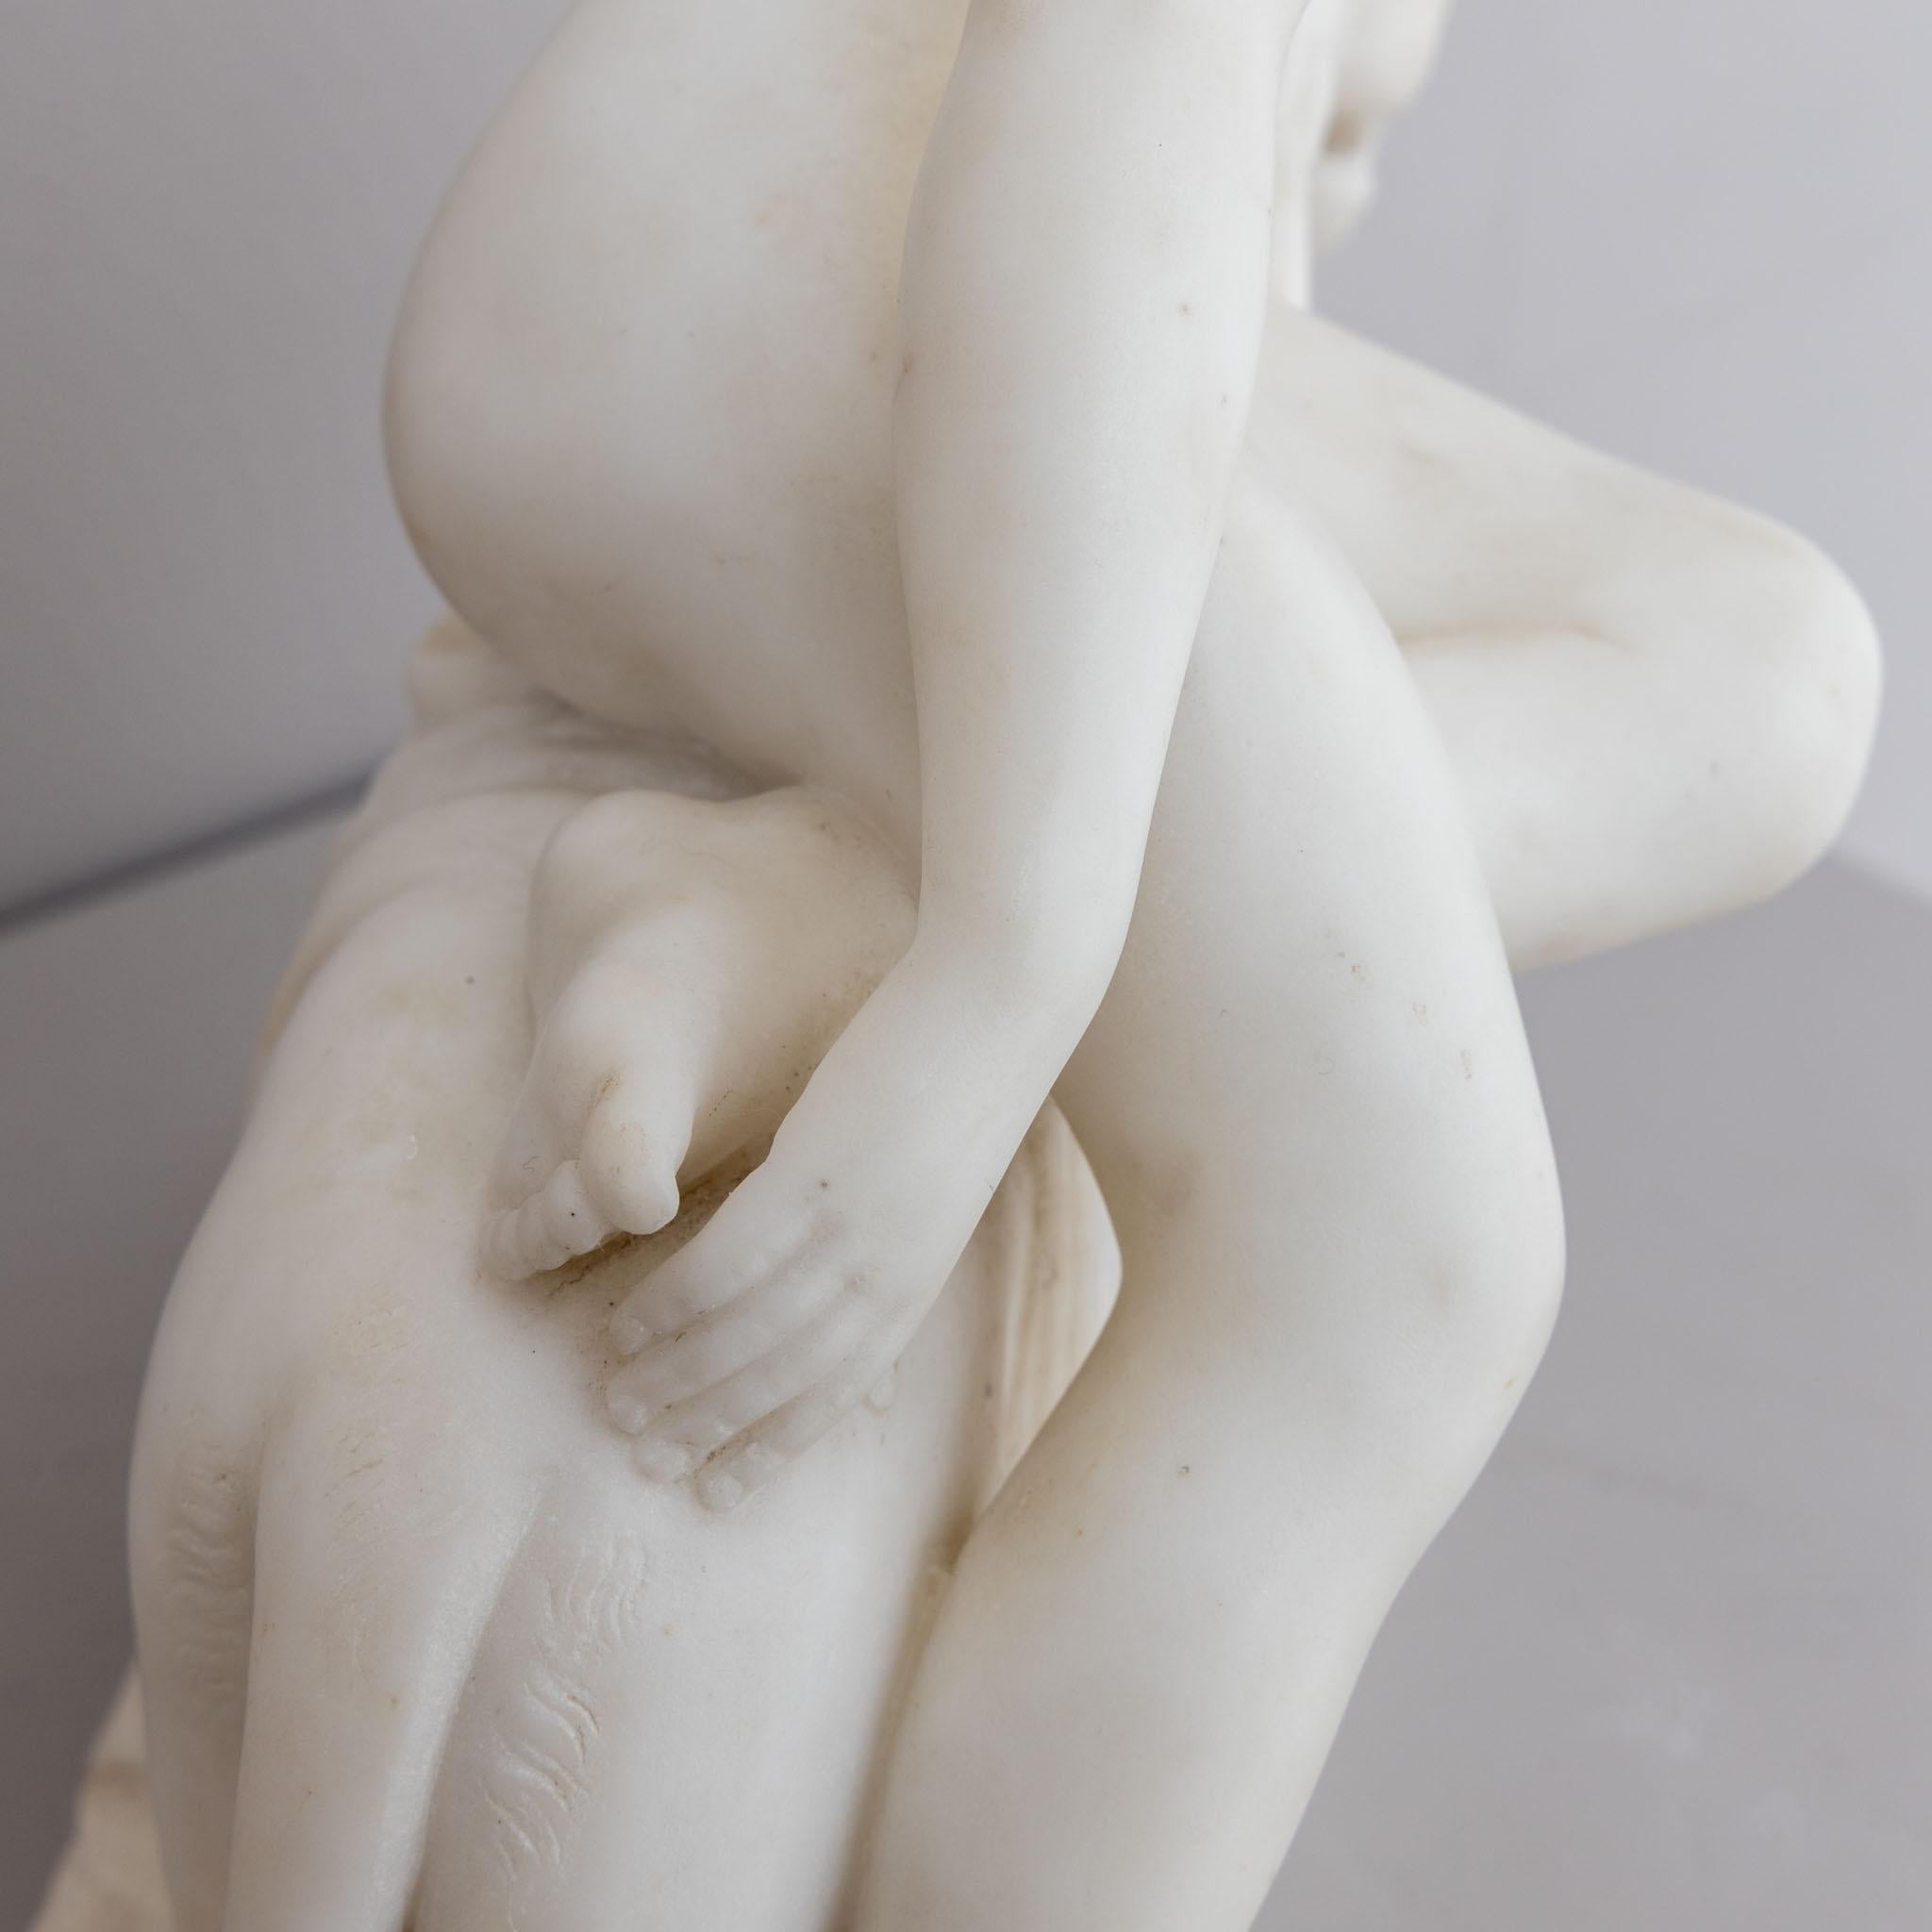 Marble Ariadne on the Panther, After Dannecker, 2nd Half 19th Century